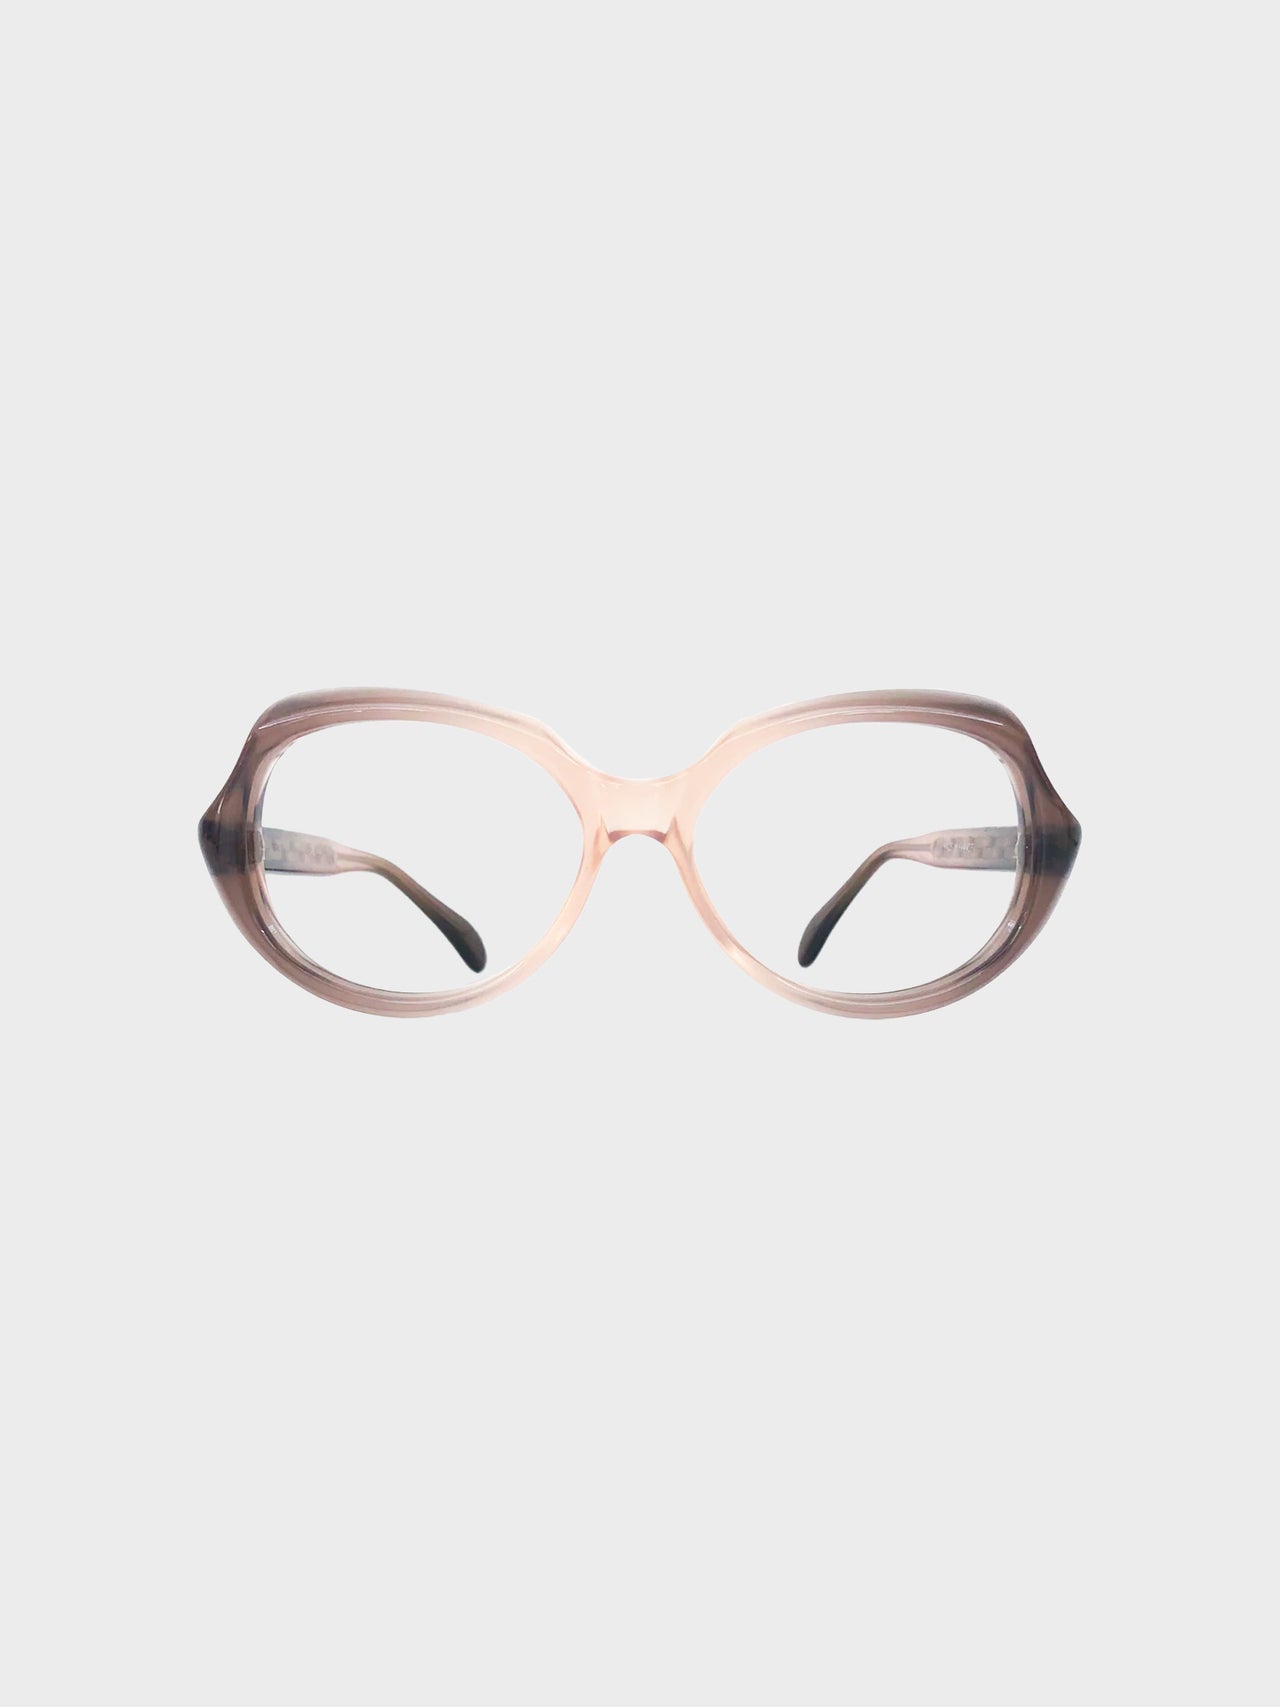 FRENCH VINTAGE / Clear glasses (PINK GRAY) #FV42